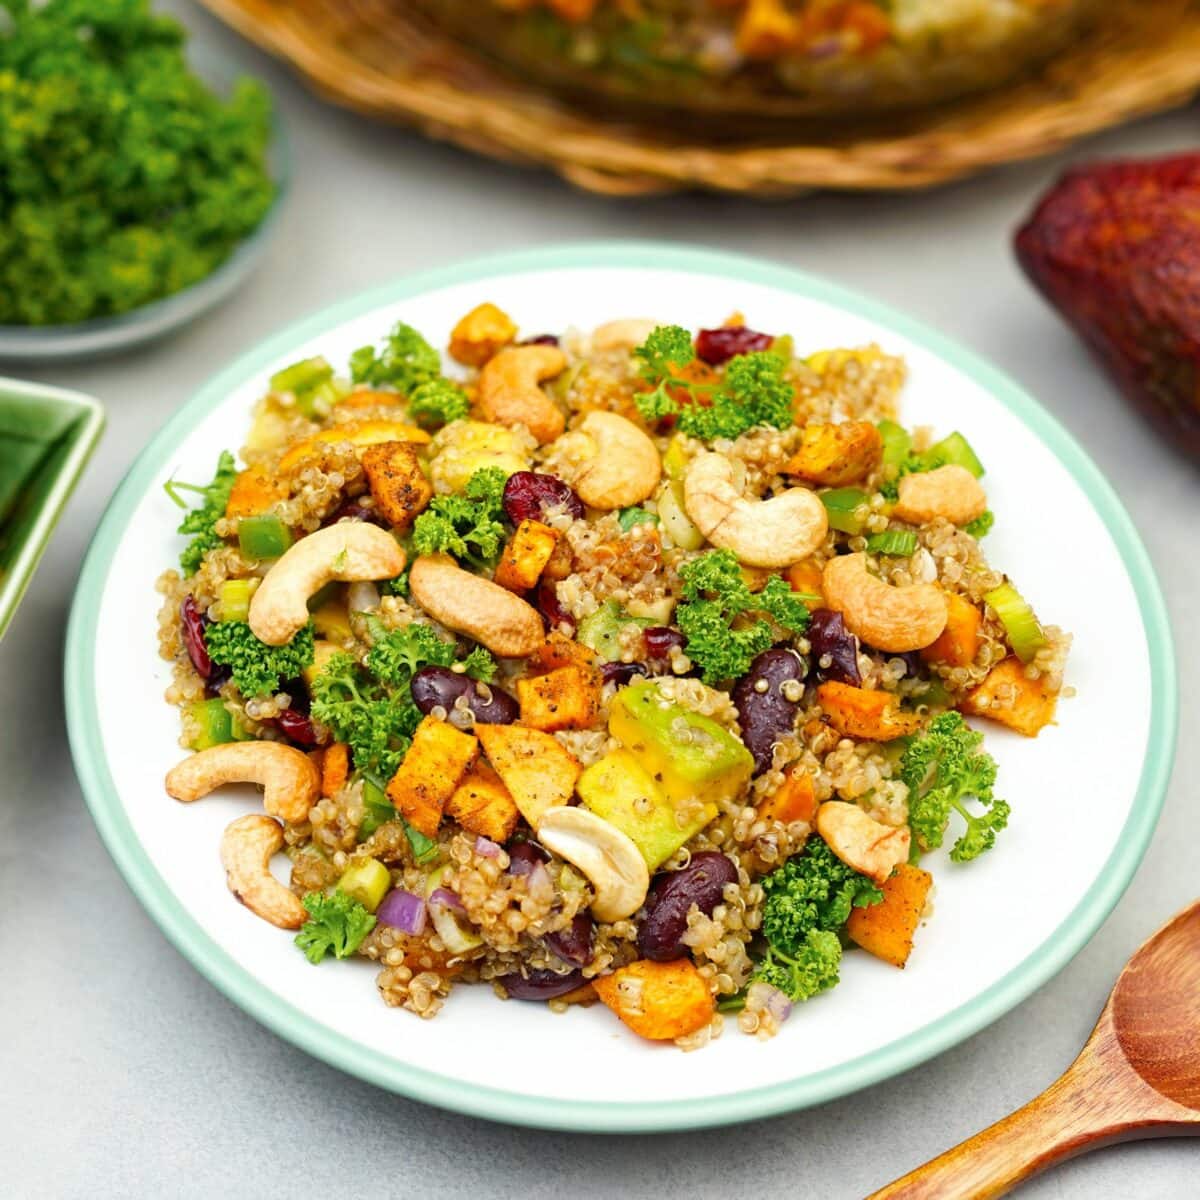 Colorful quinoa salad with vegetables and cashews